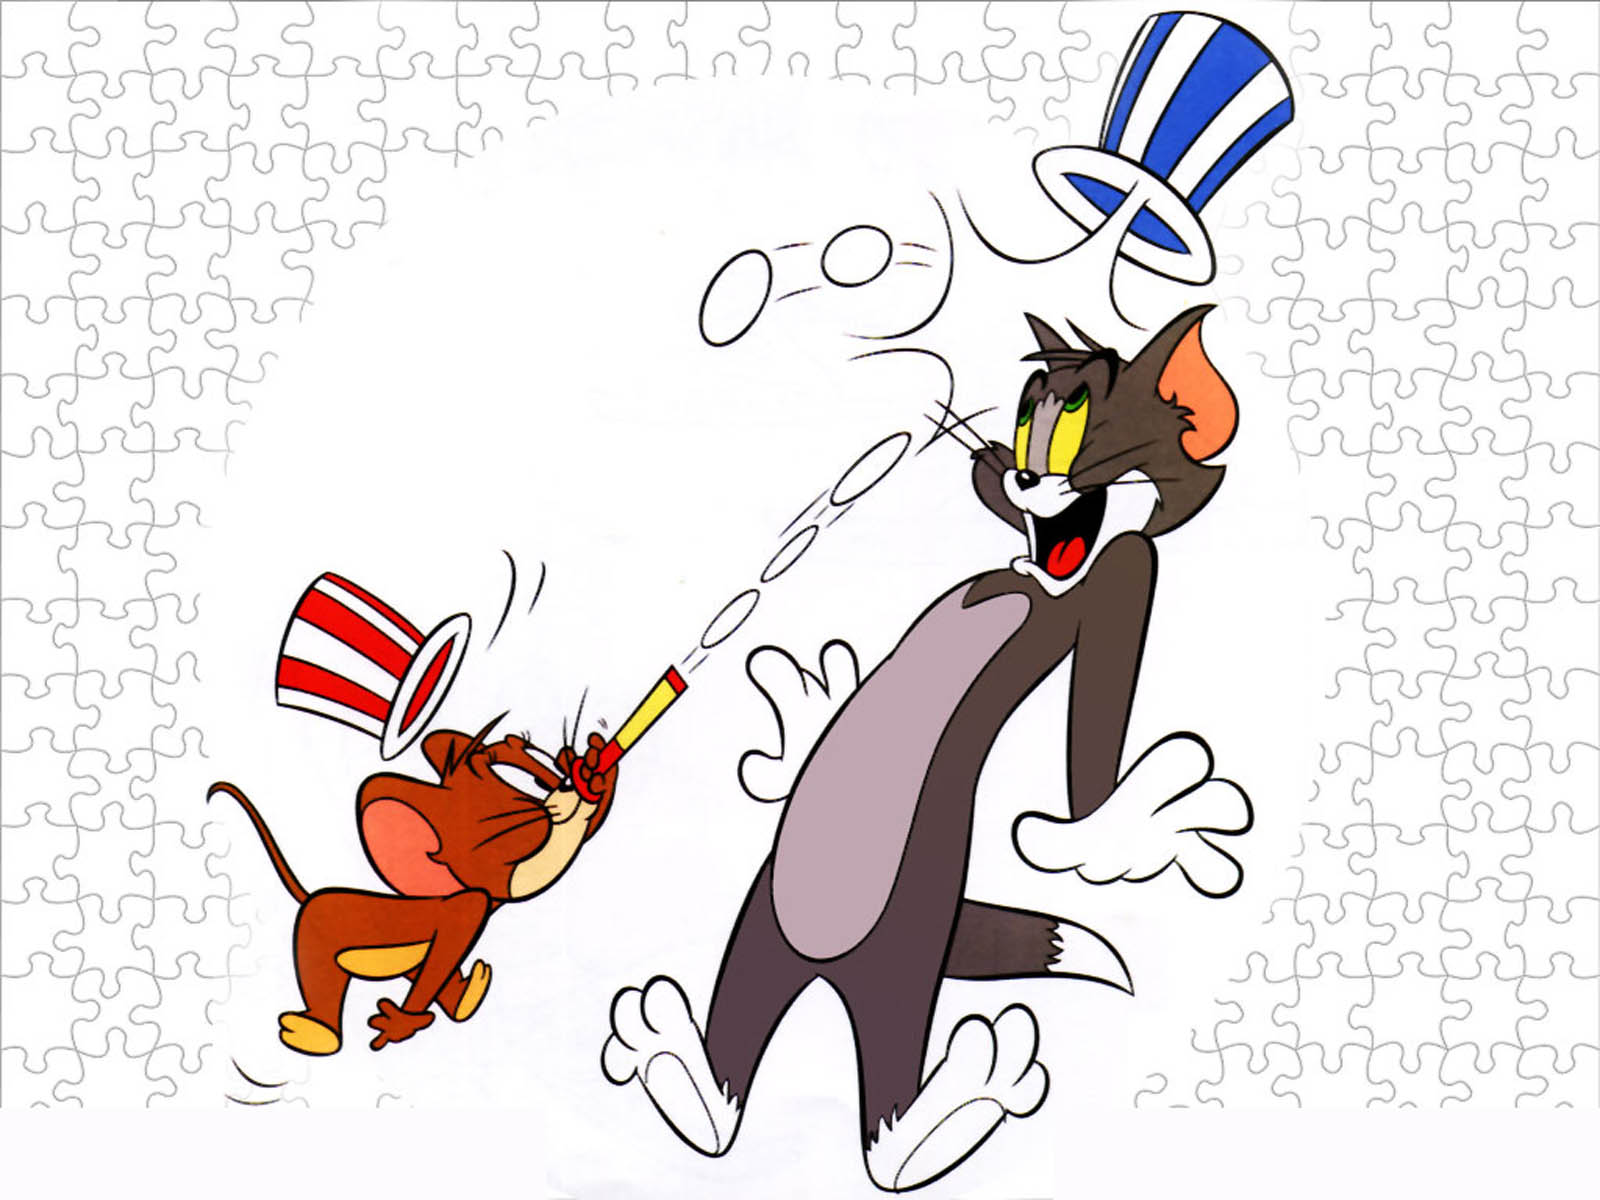 Tom And Jerry Wallpaper #6964446